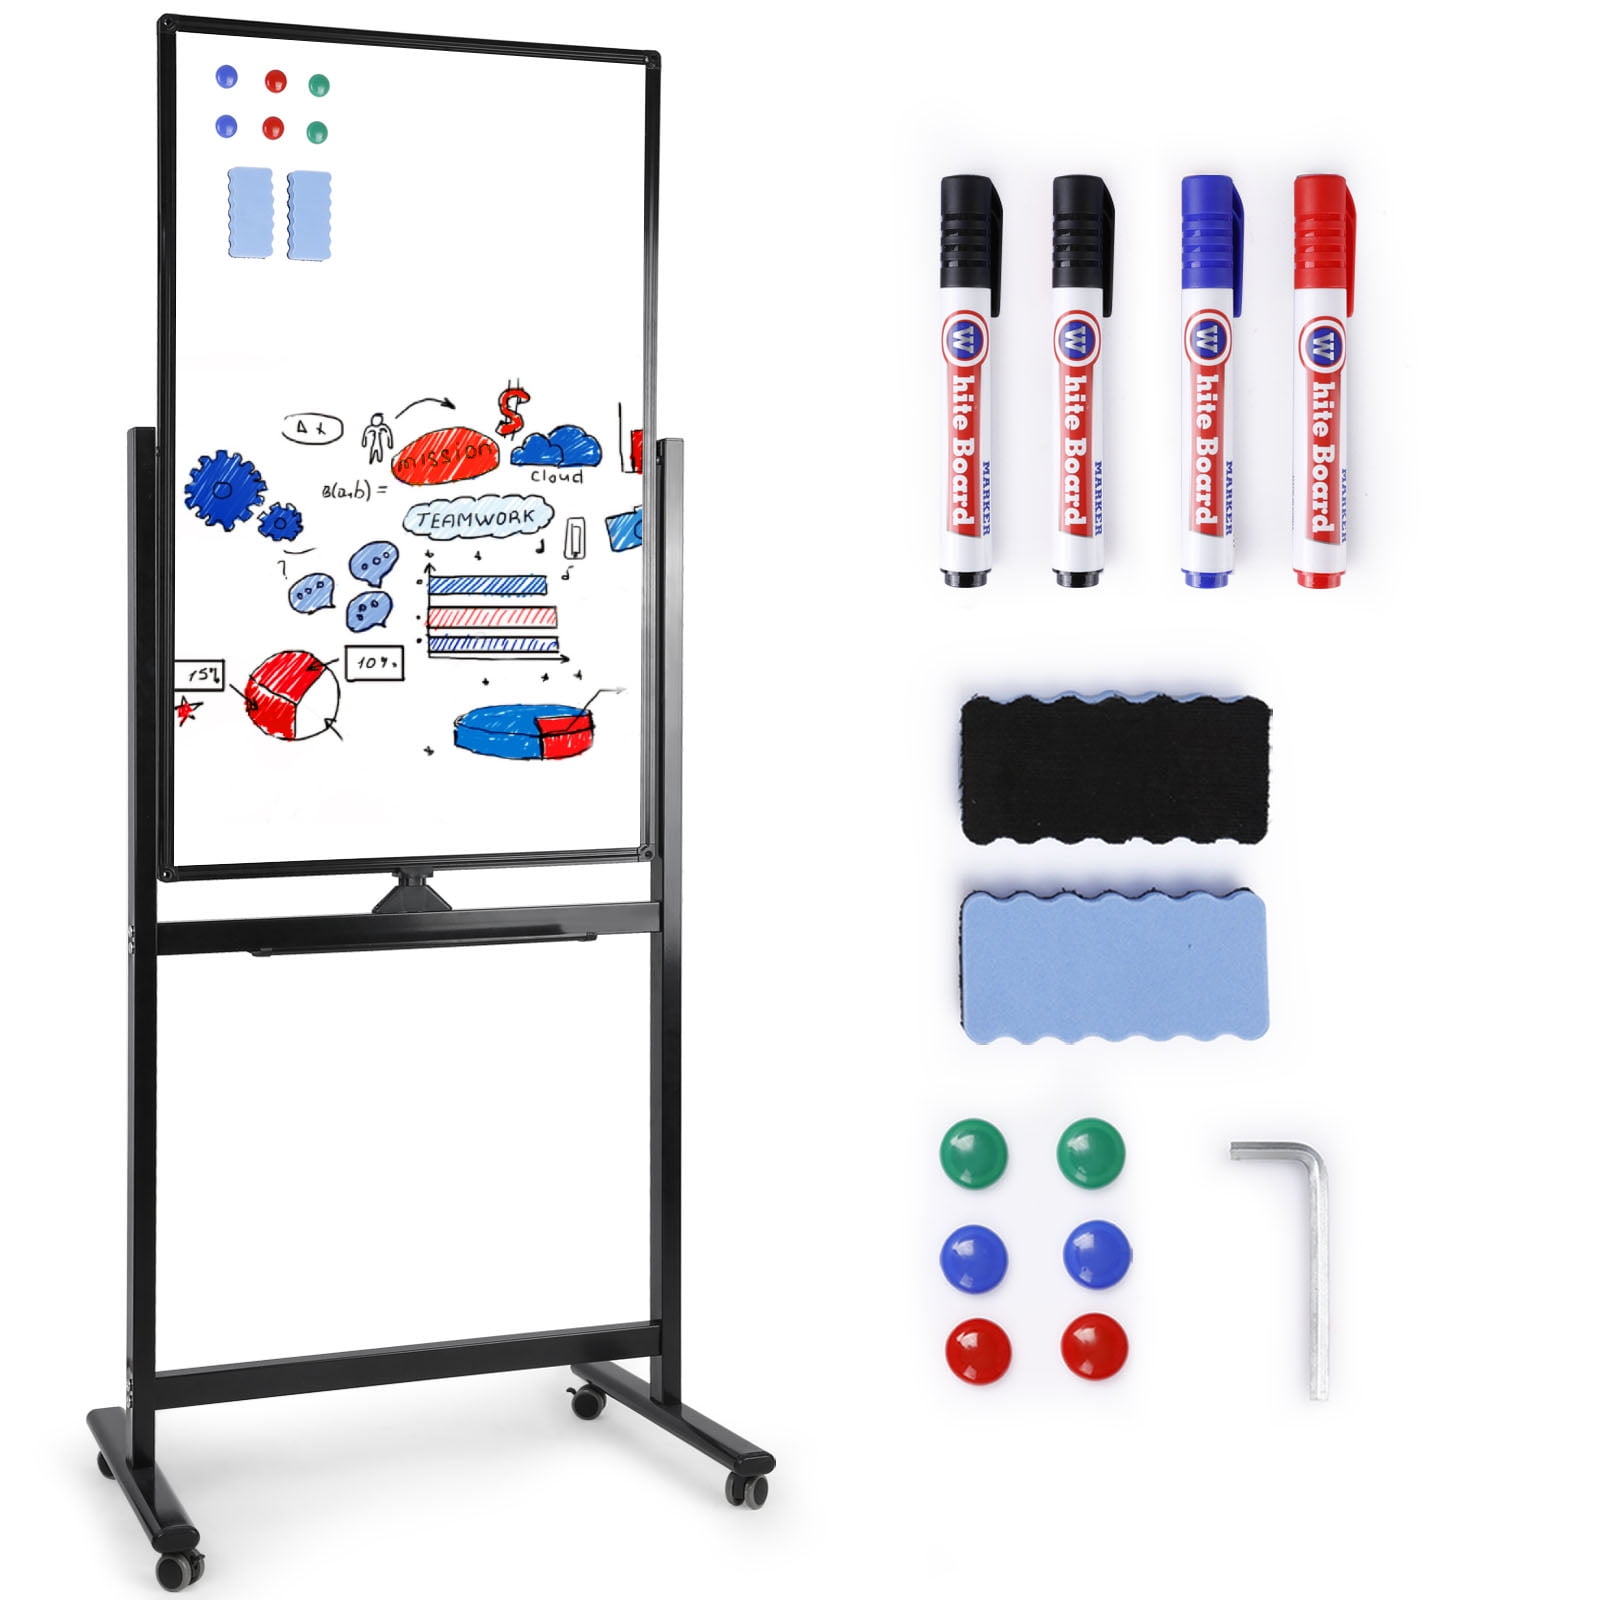 Mobile Whiteboard, 40x24 inches Double Sided Reversible Whiteboard on  Wheels, Rolling Stand Portable Easel Frame for Office Classroom Home, with  4 Markers, 6 Magnets, 2 Erasers 